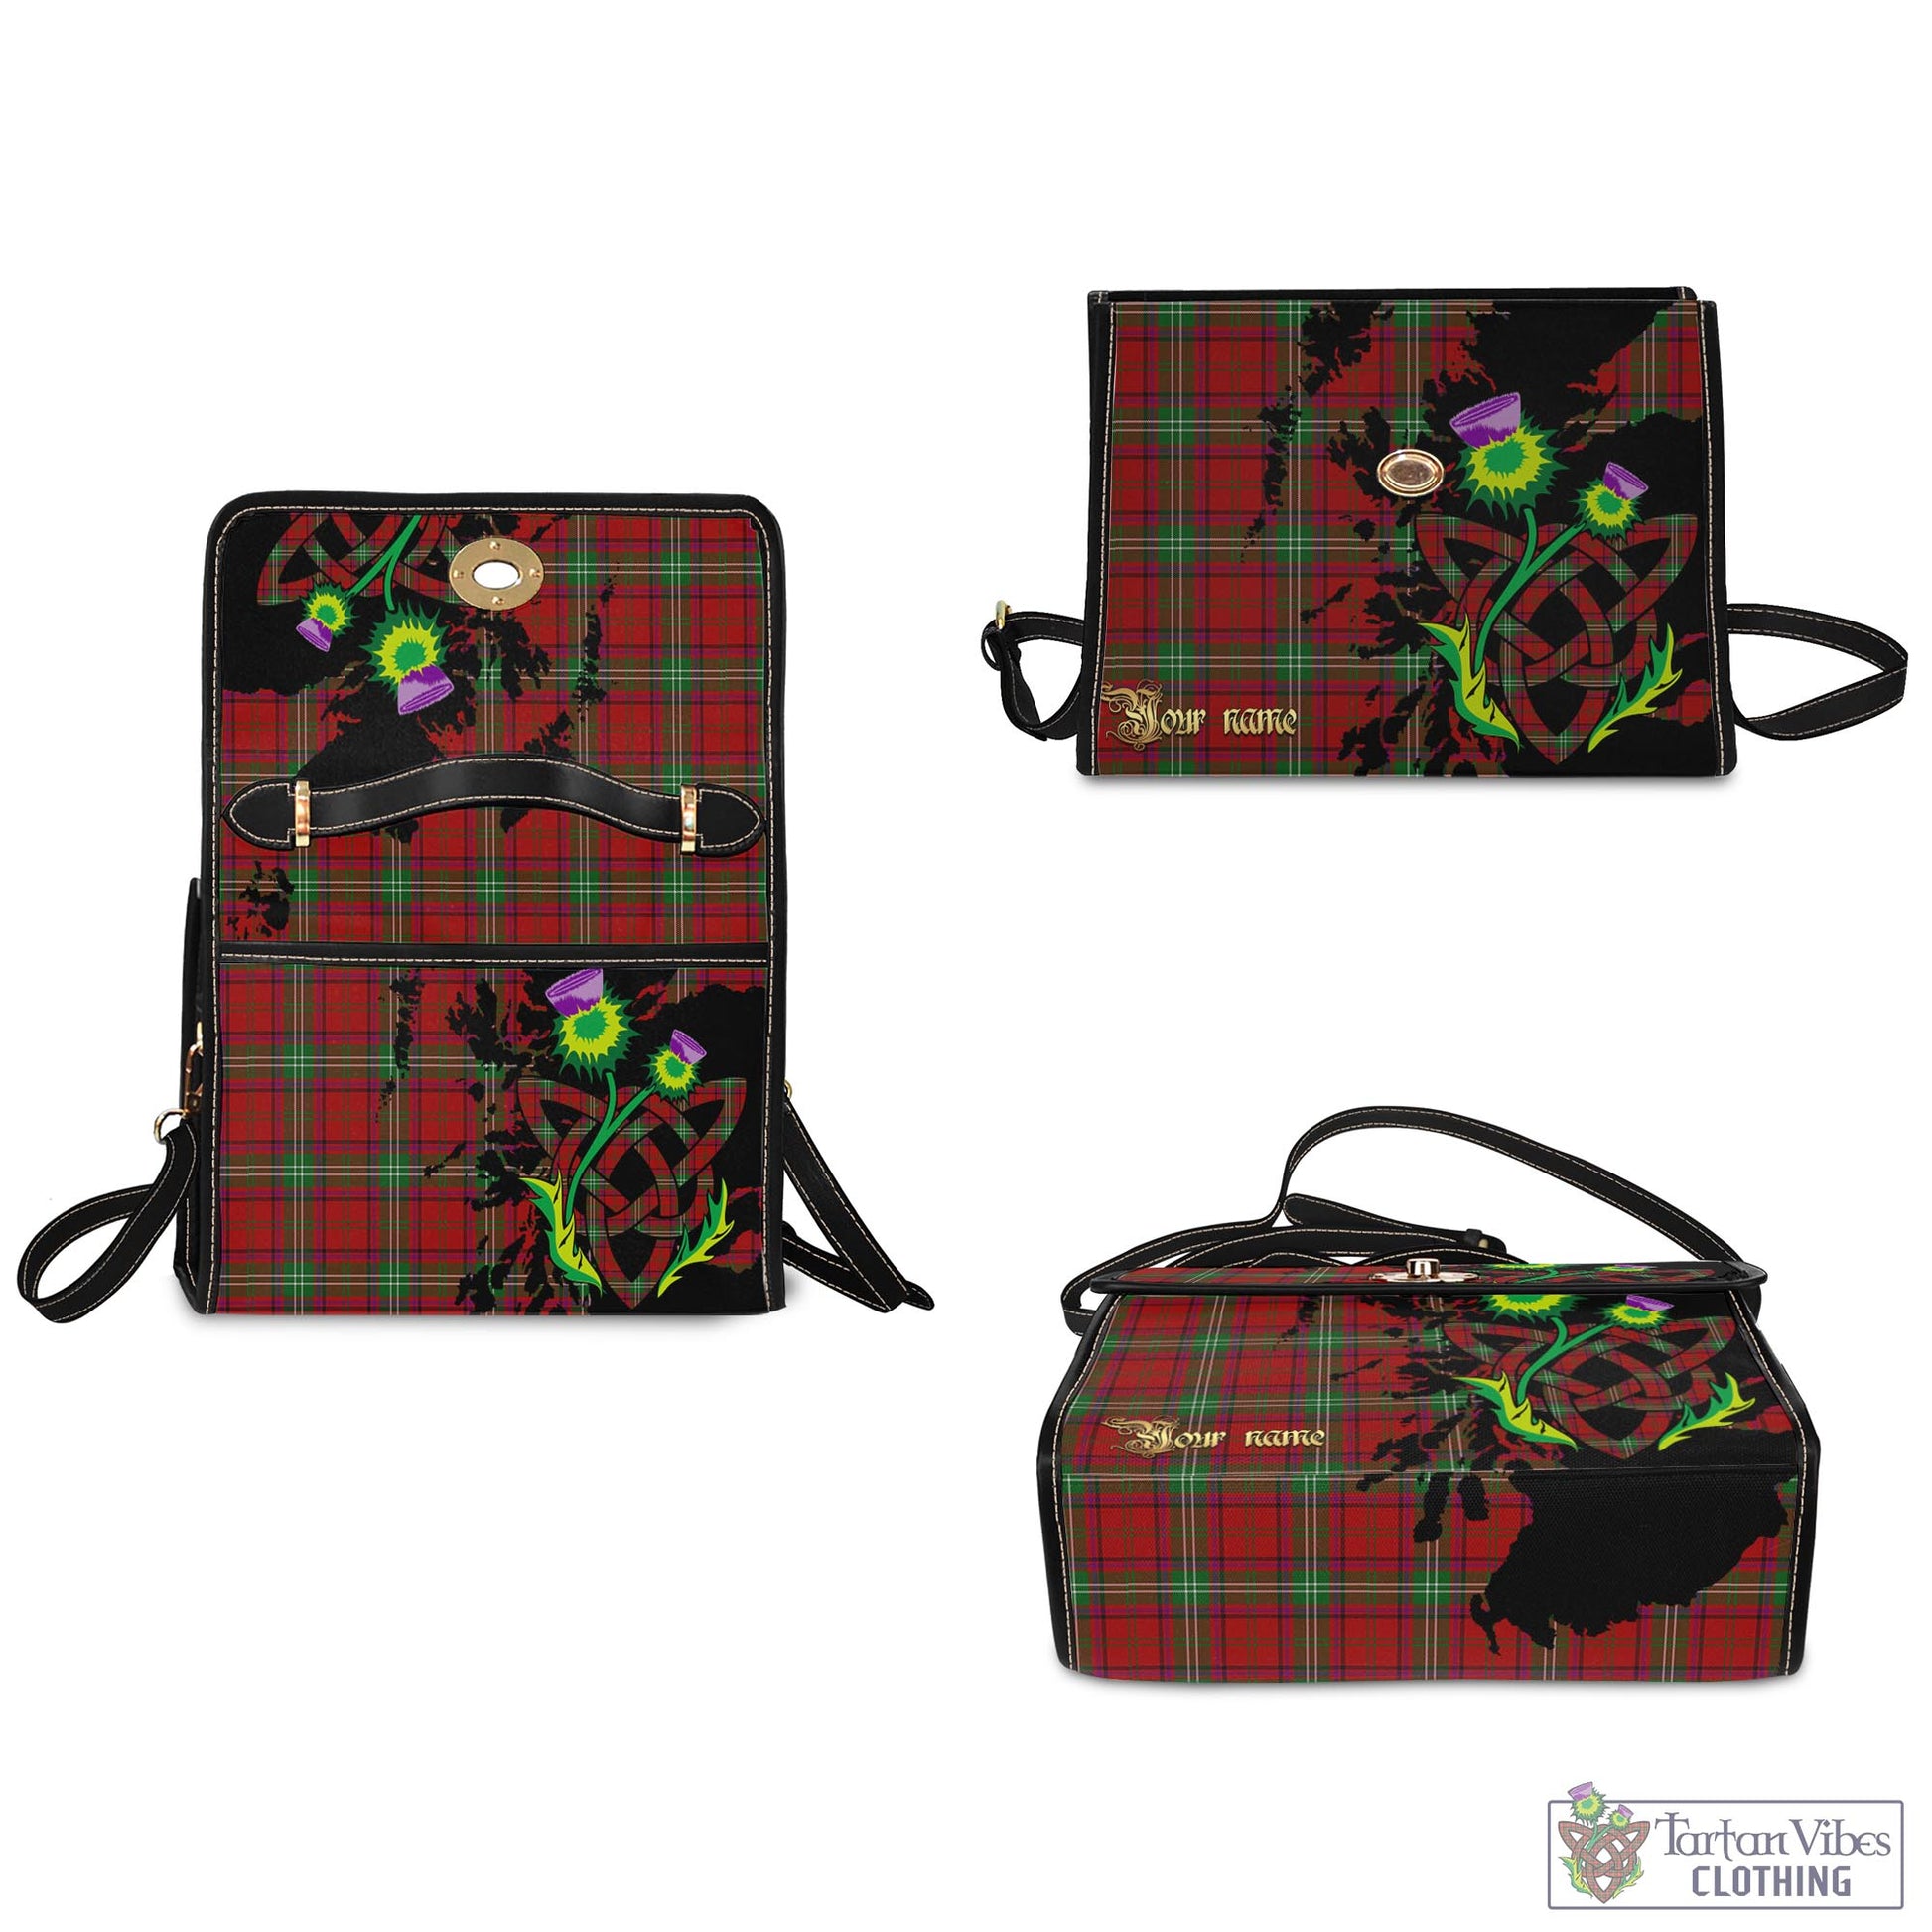 Tartan Vibes Clothing Seton Tartan Waterproof Canvas Bag with Scotland Map and Thistle Celtic Accents